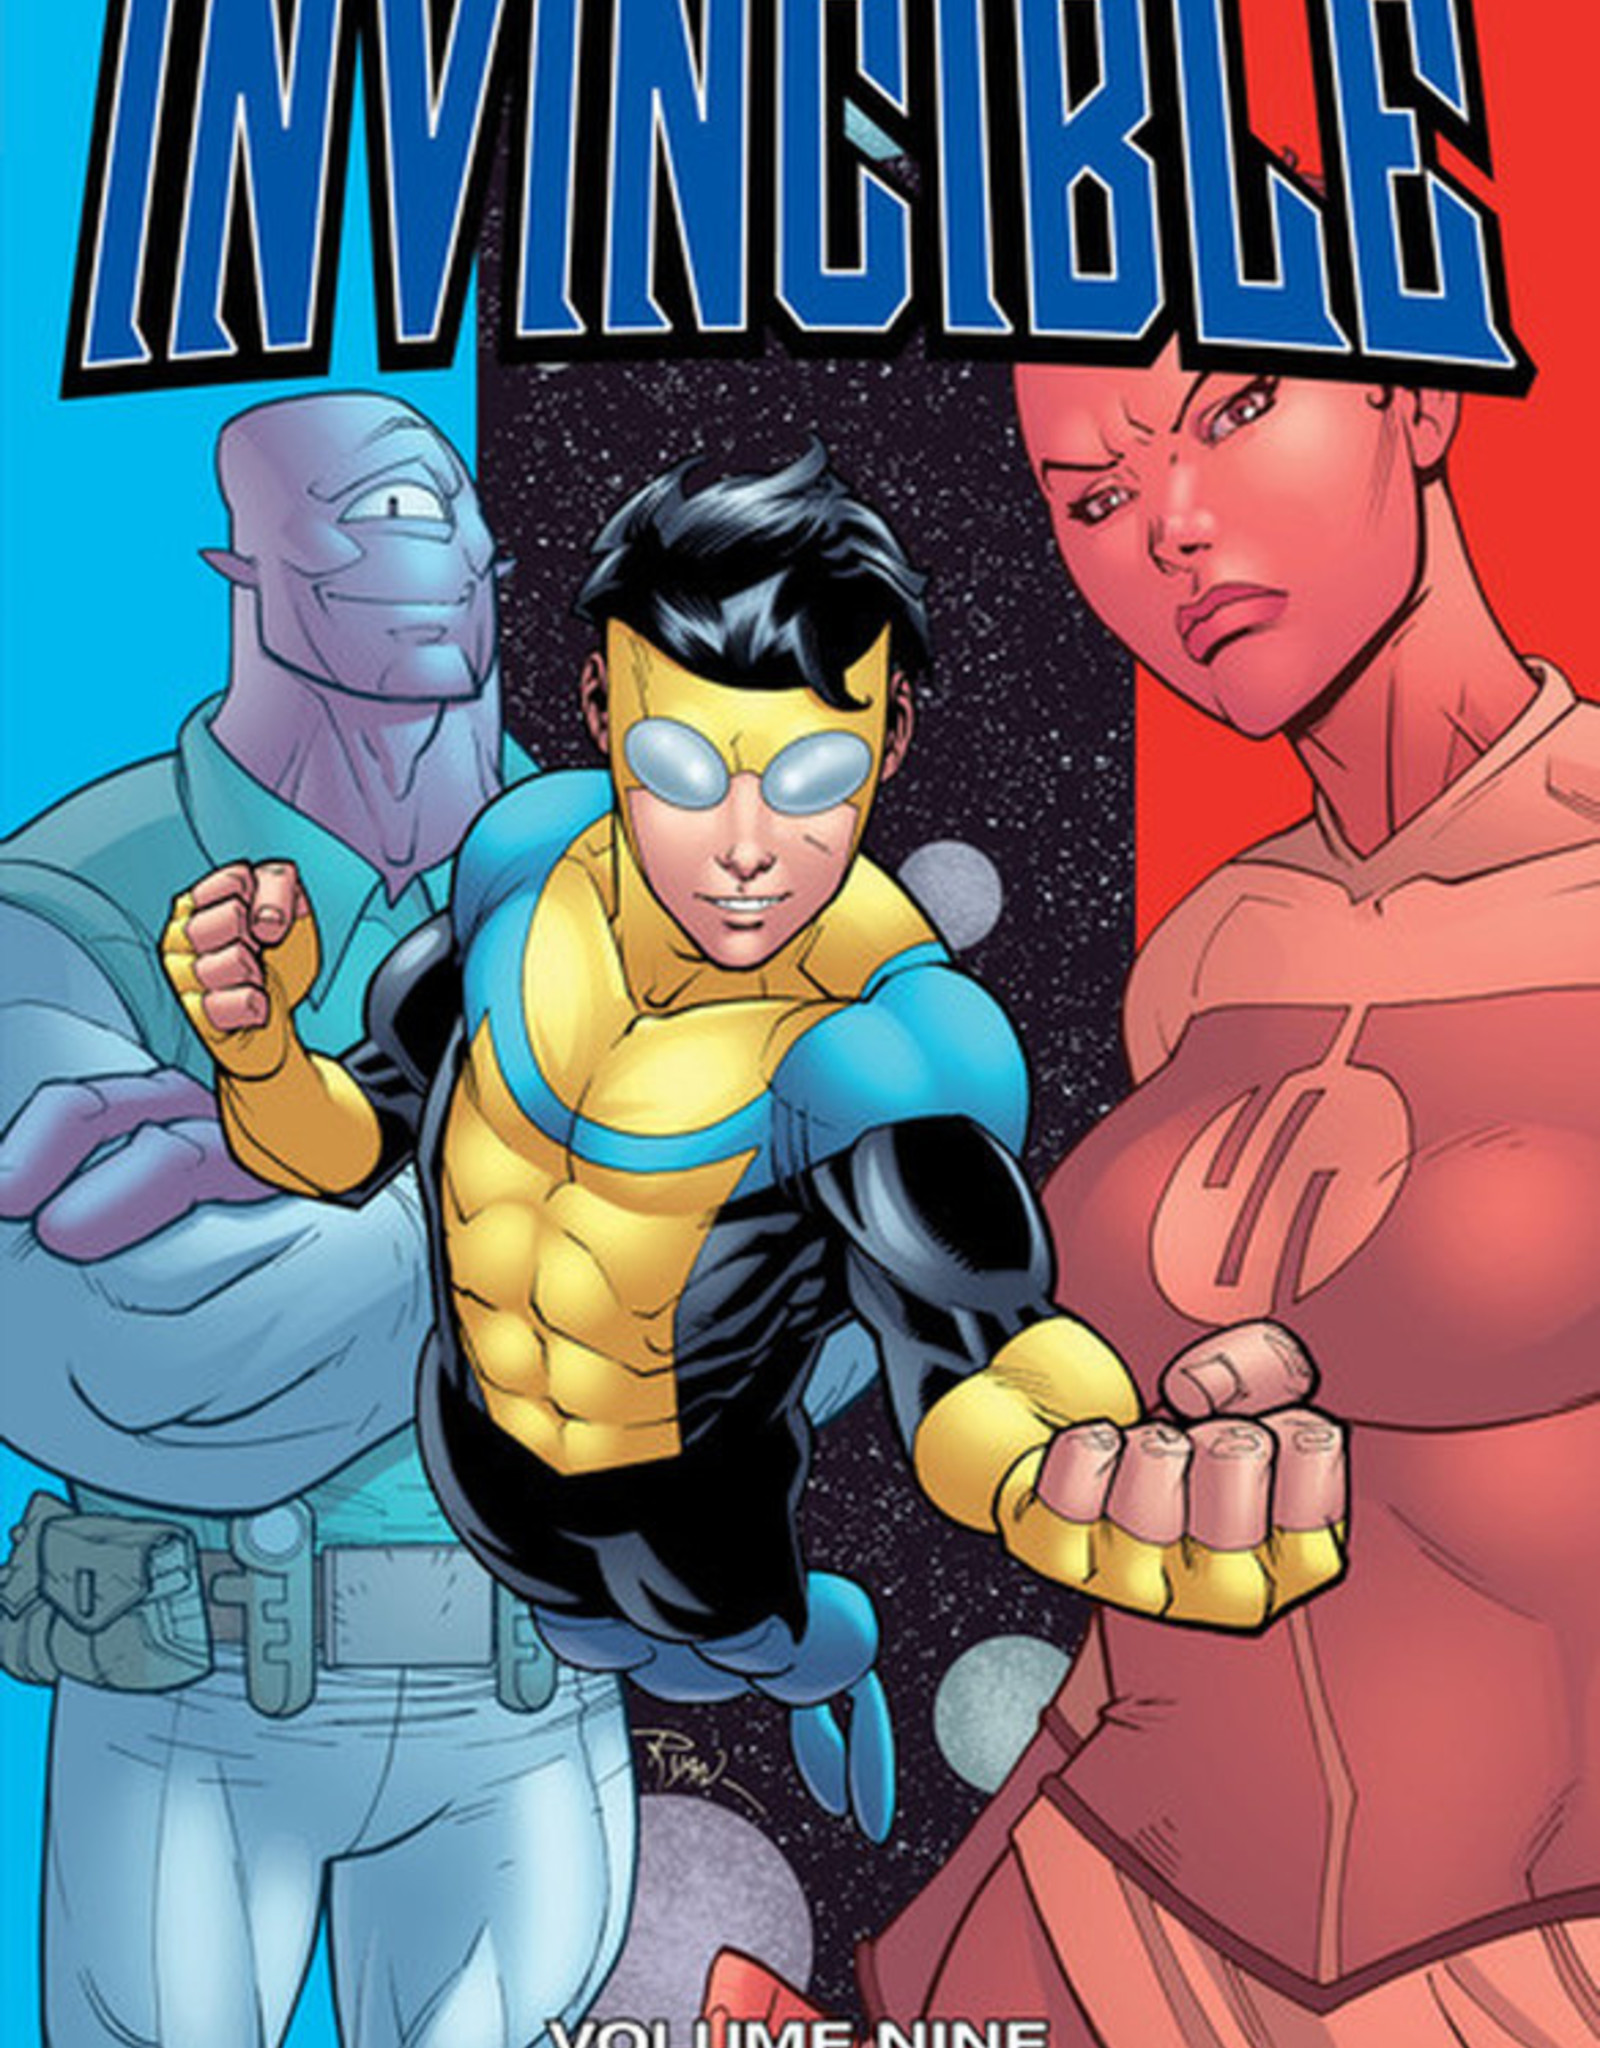 Image Comics Invincible TP Volume 09 Out of this World